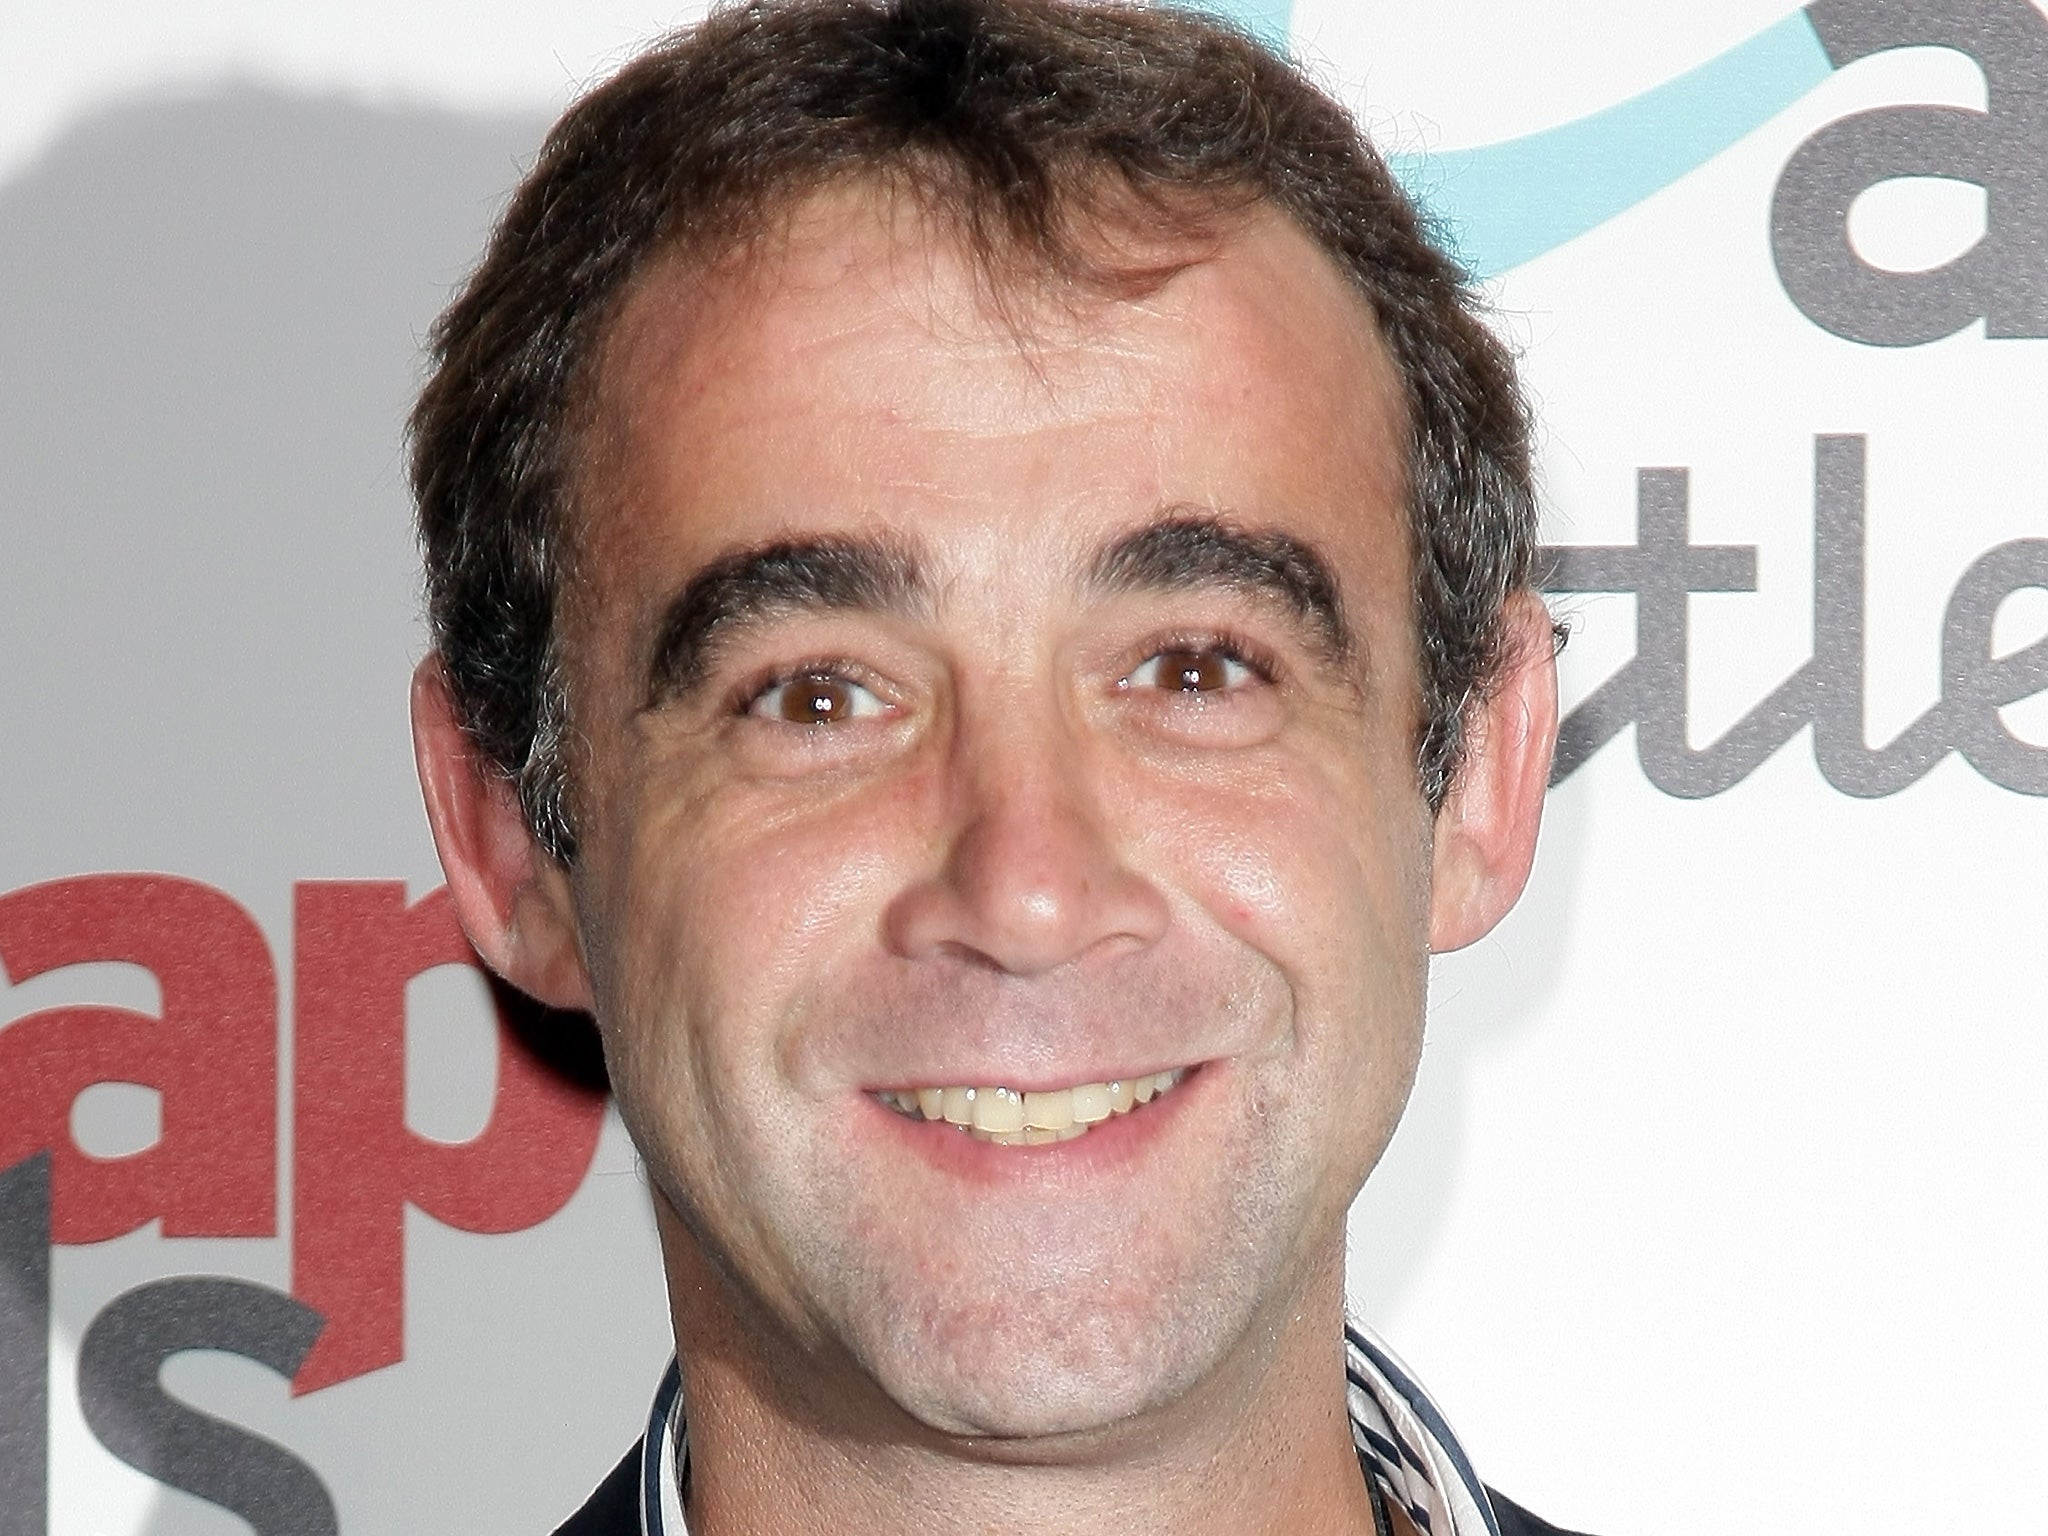 Michael Le Vell, the Coronation Street actor whose real name is Michael Turner, is due before magistrates on 27 February